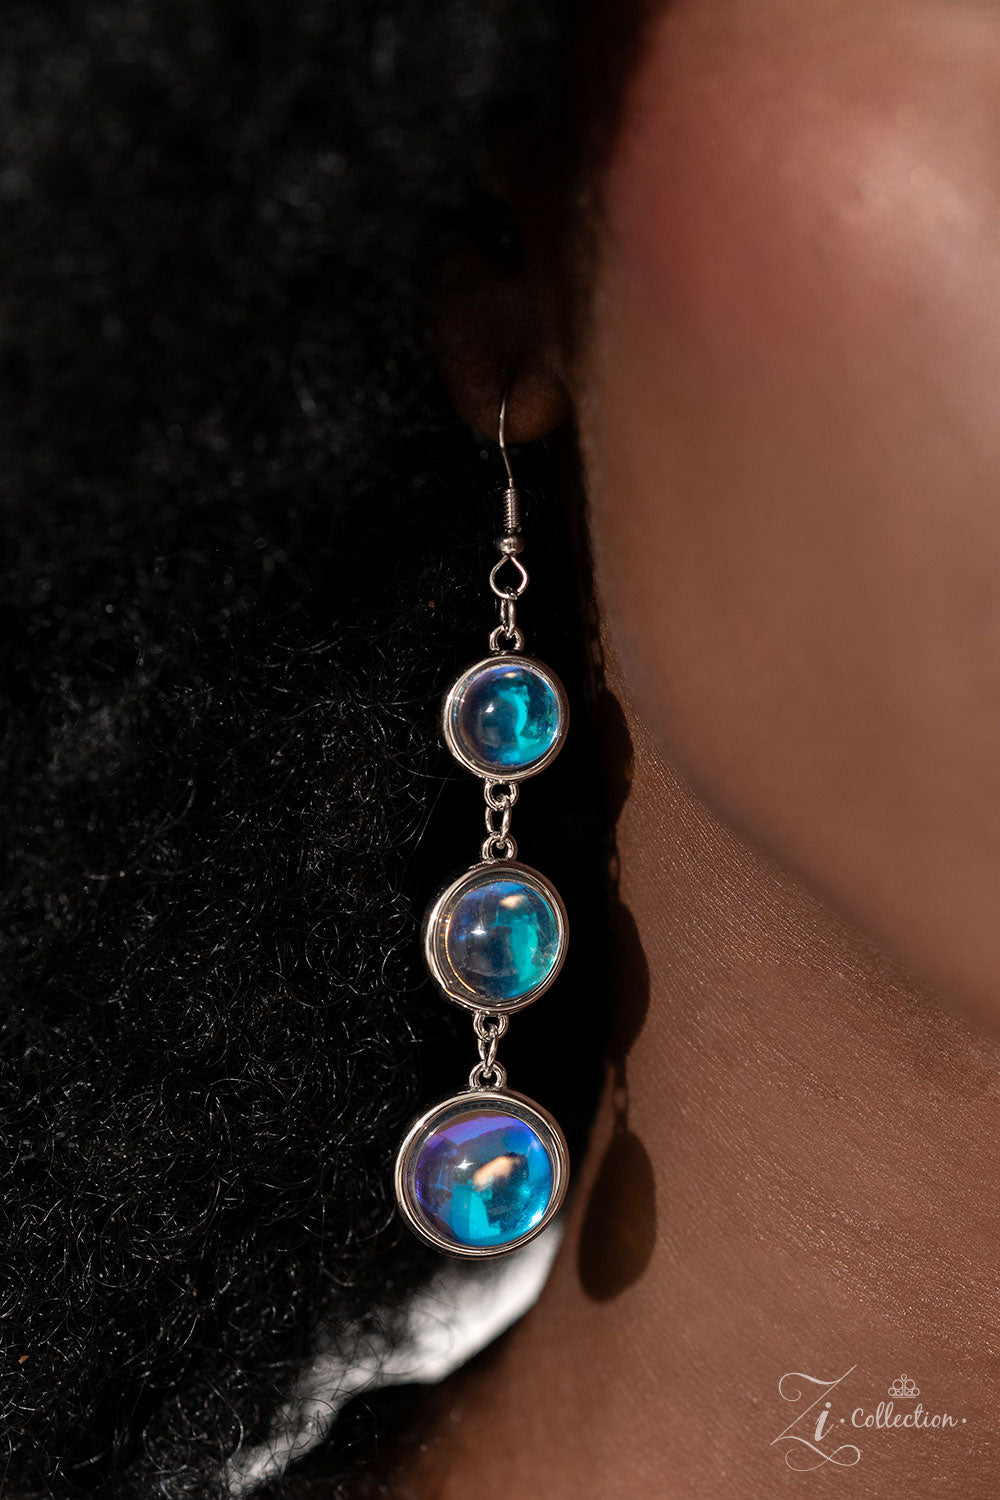 Hypnotic Multi 2023 Zi Collection Necklace - Paparazzi Accessories  A dizzying display of silver hoops drapes across the chest in effervescent layers. Smooth, glassy beads, brushed in swirls of pastel iridescence, bubble up from some of the open, circular frames, further exaggerating their staggered size and placement, and showcasing their dreamy opalescent finish. With every new angle, a different hue emerges from the glassy beads.